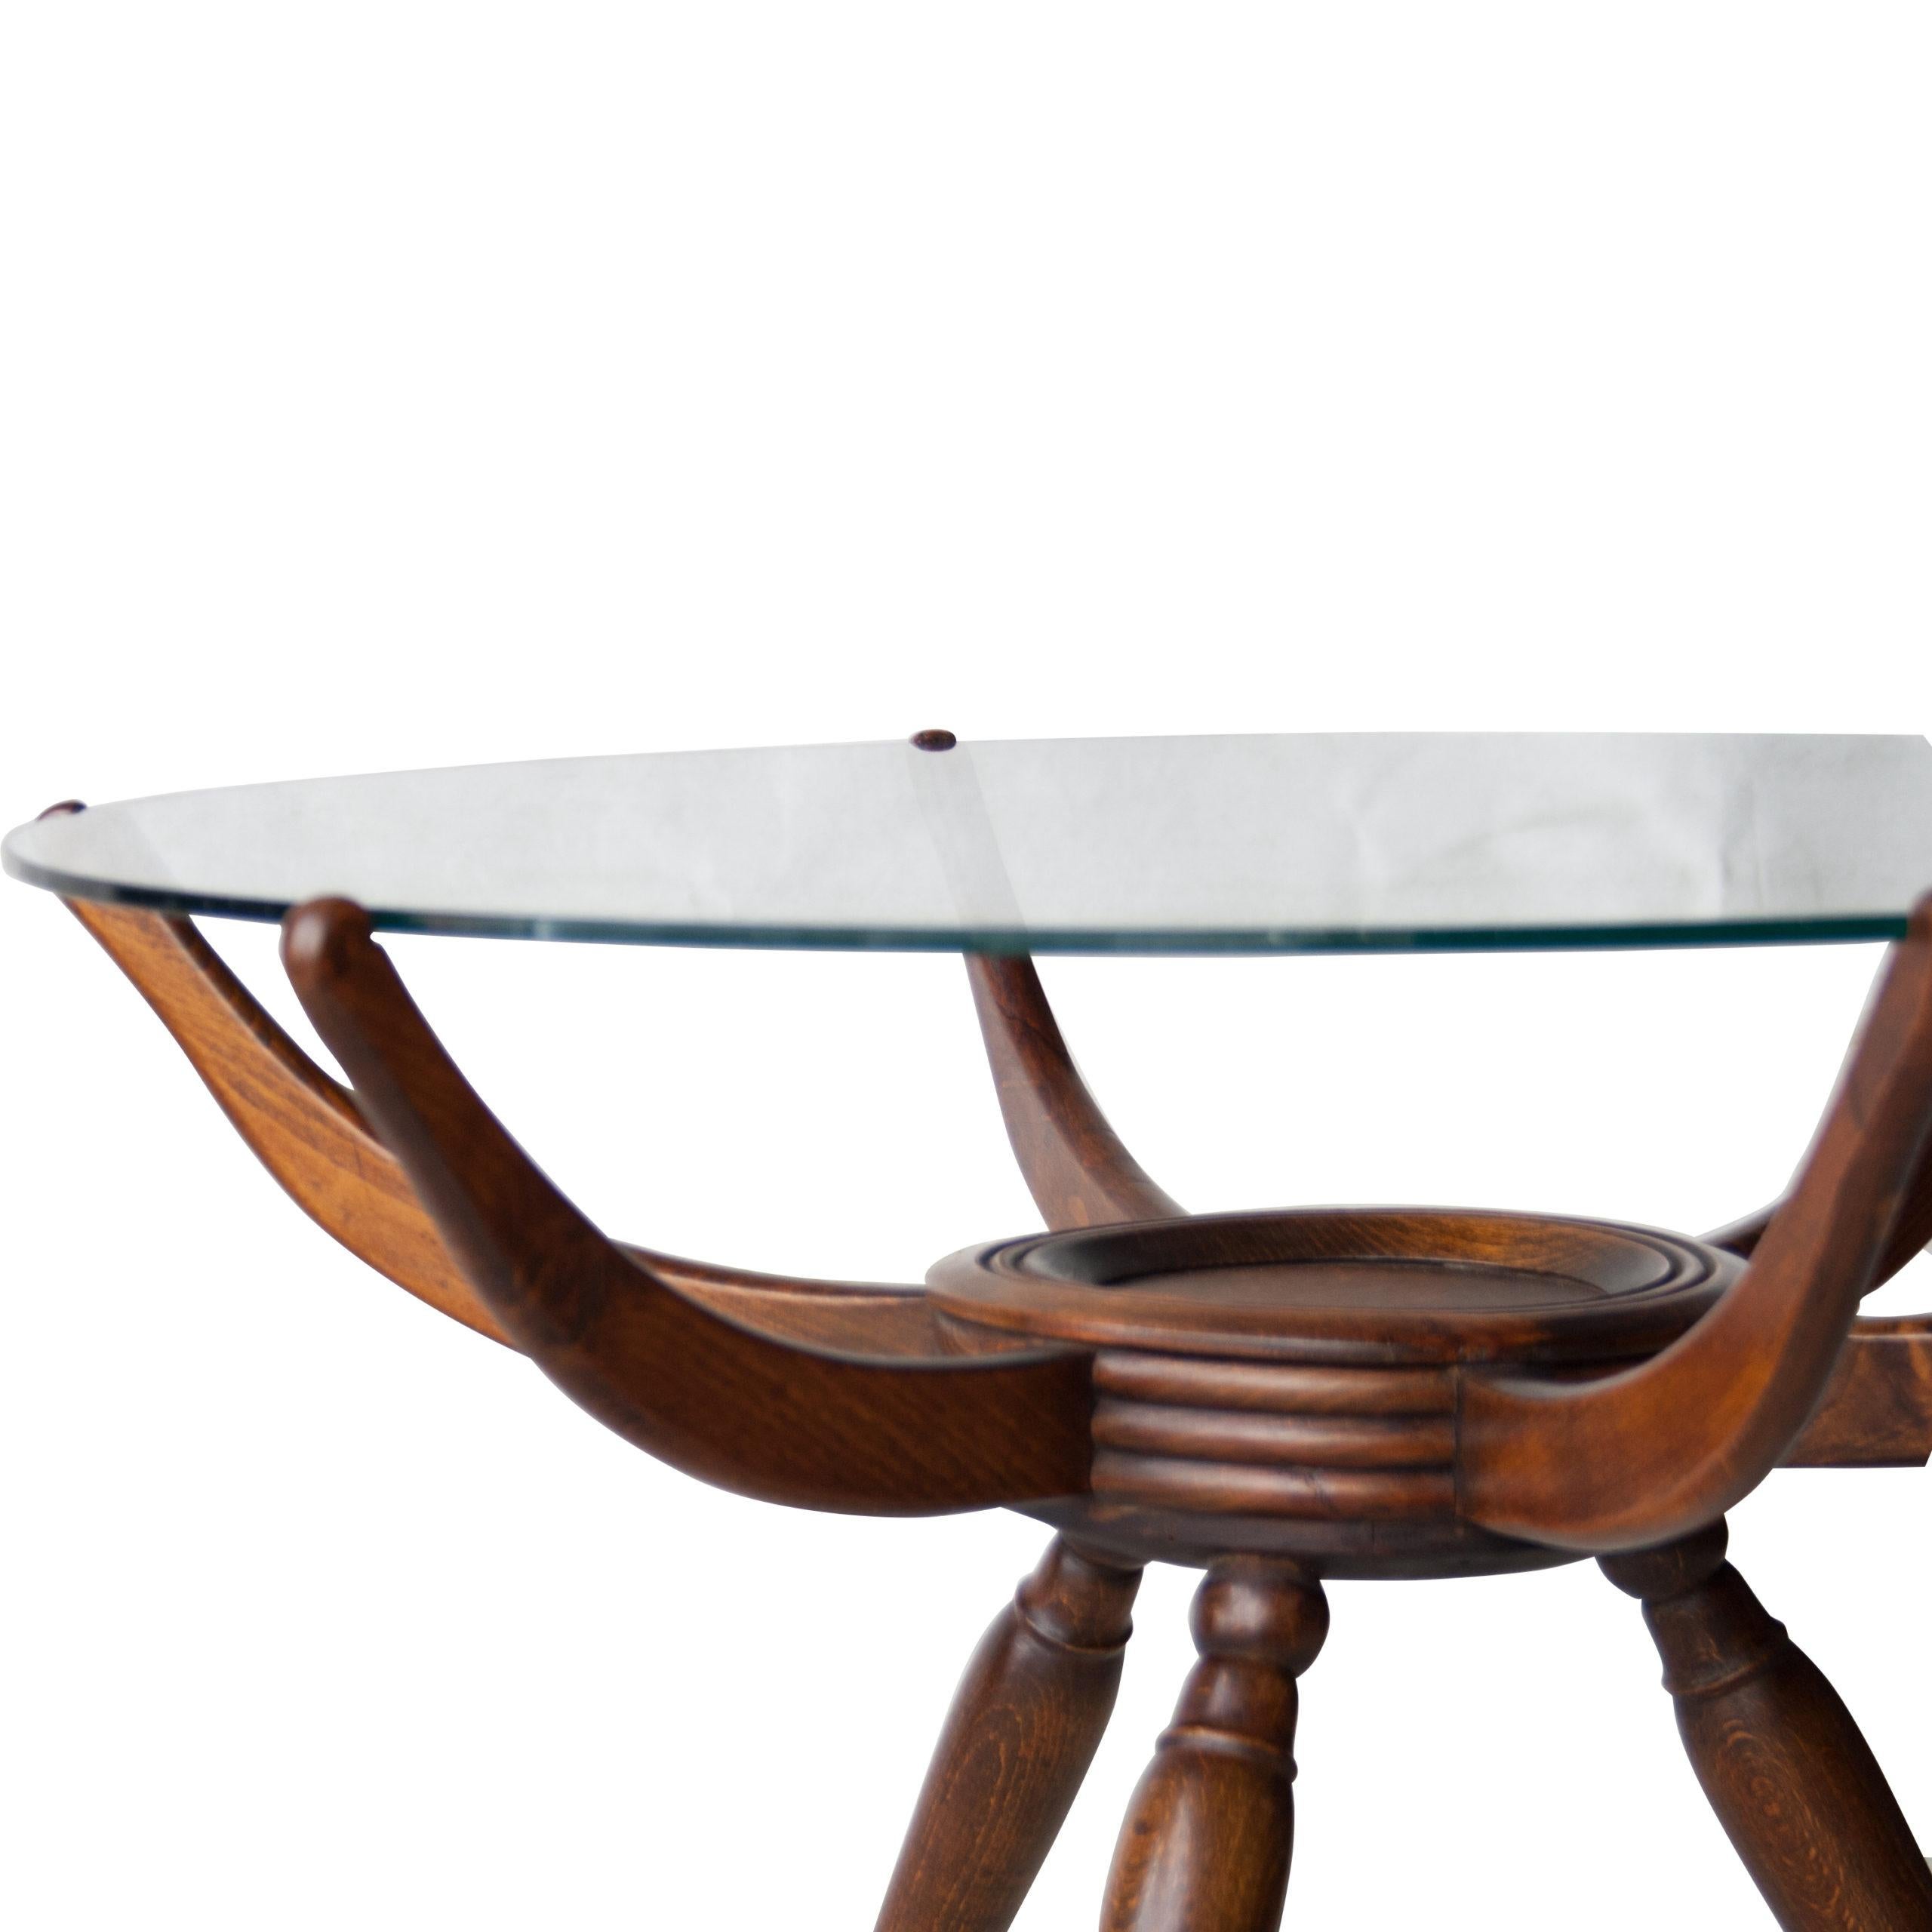 Italian spider table designed by Carlo de Carli in the 1950s. Mahogany three legged structure with rounded glass top.
 